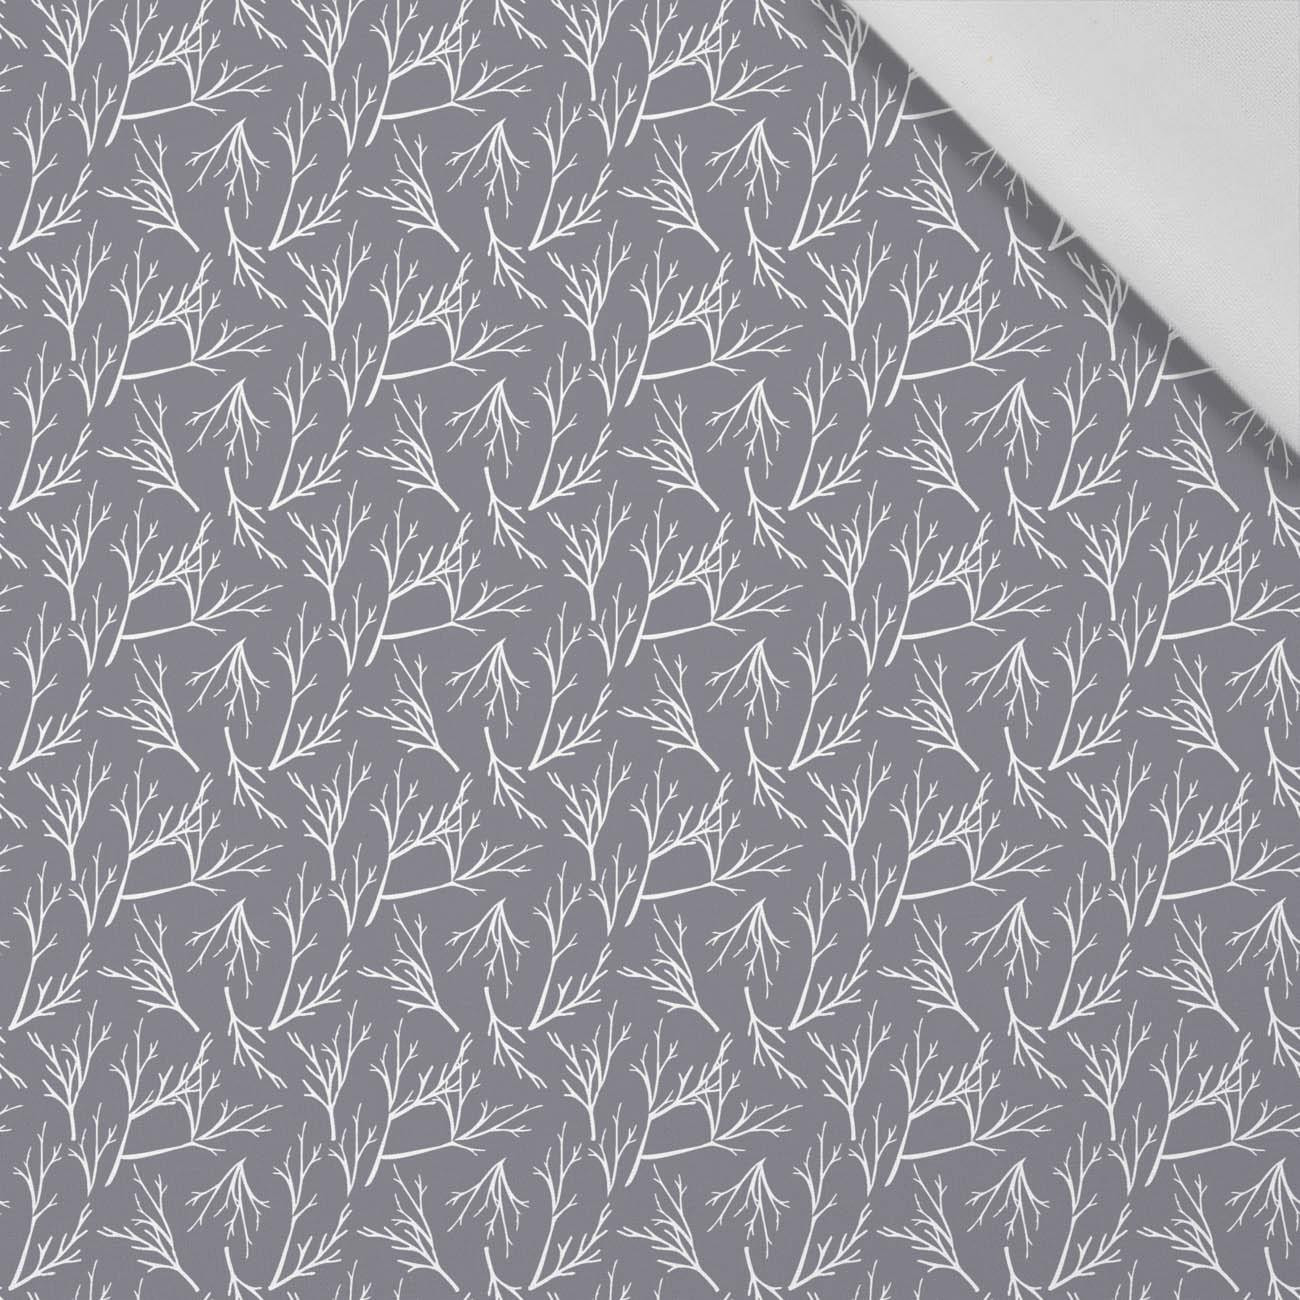 TWIGS pat. 2 (WINTER TIME) / grey - Cotton woven fabric